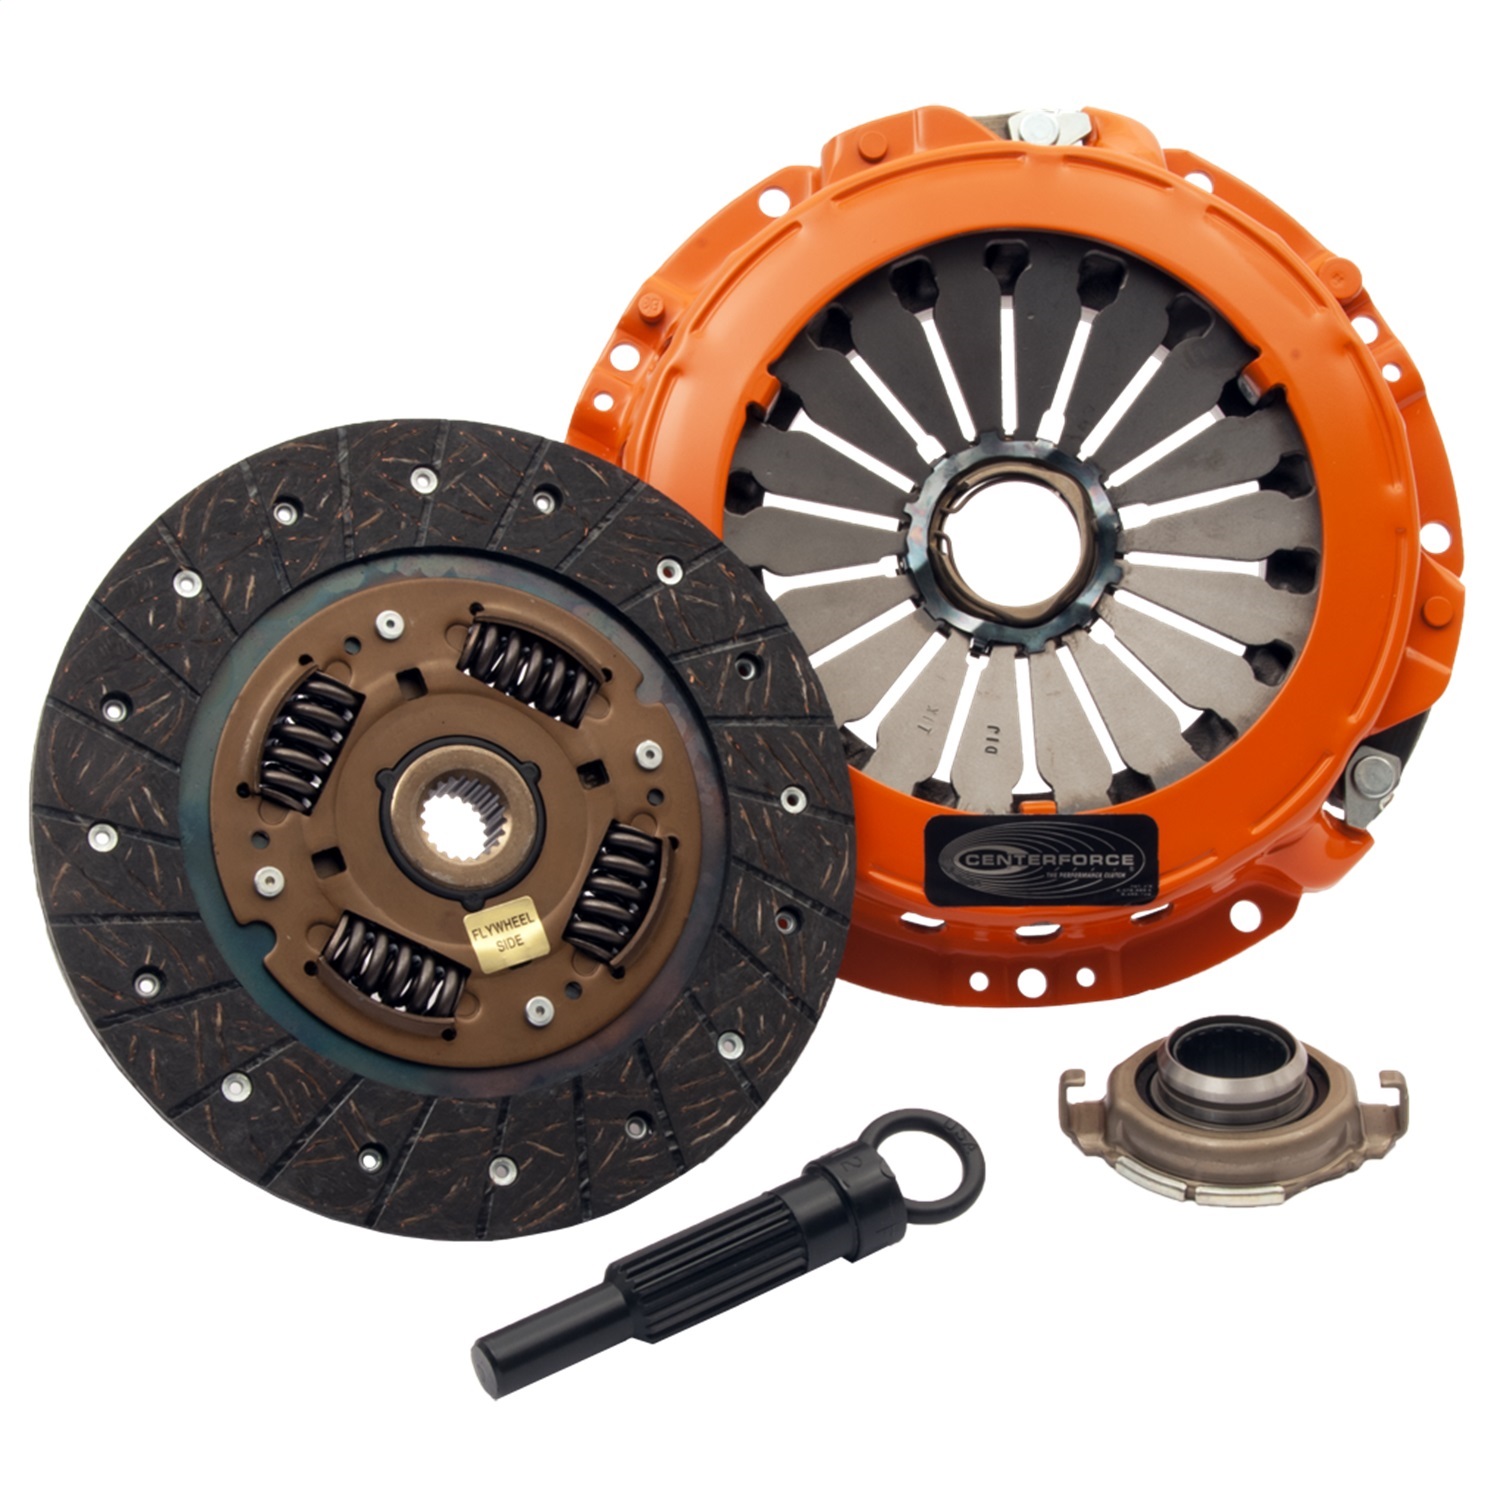 Centerforce Centerforce KCFT345778 Centerforce II; Clutch Pressure Plate And Disc Set